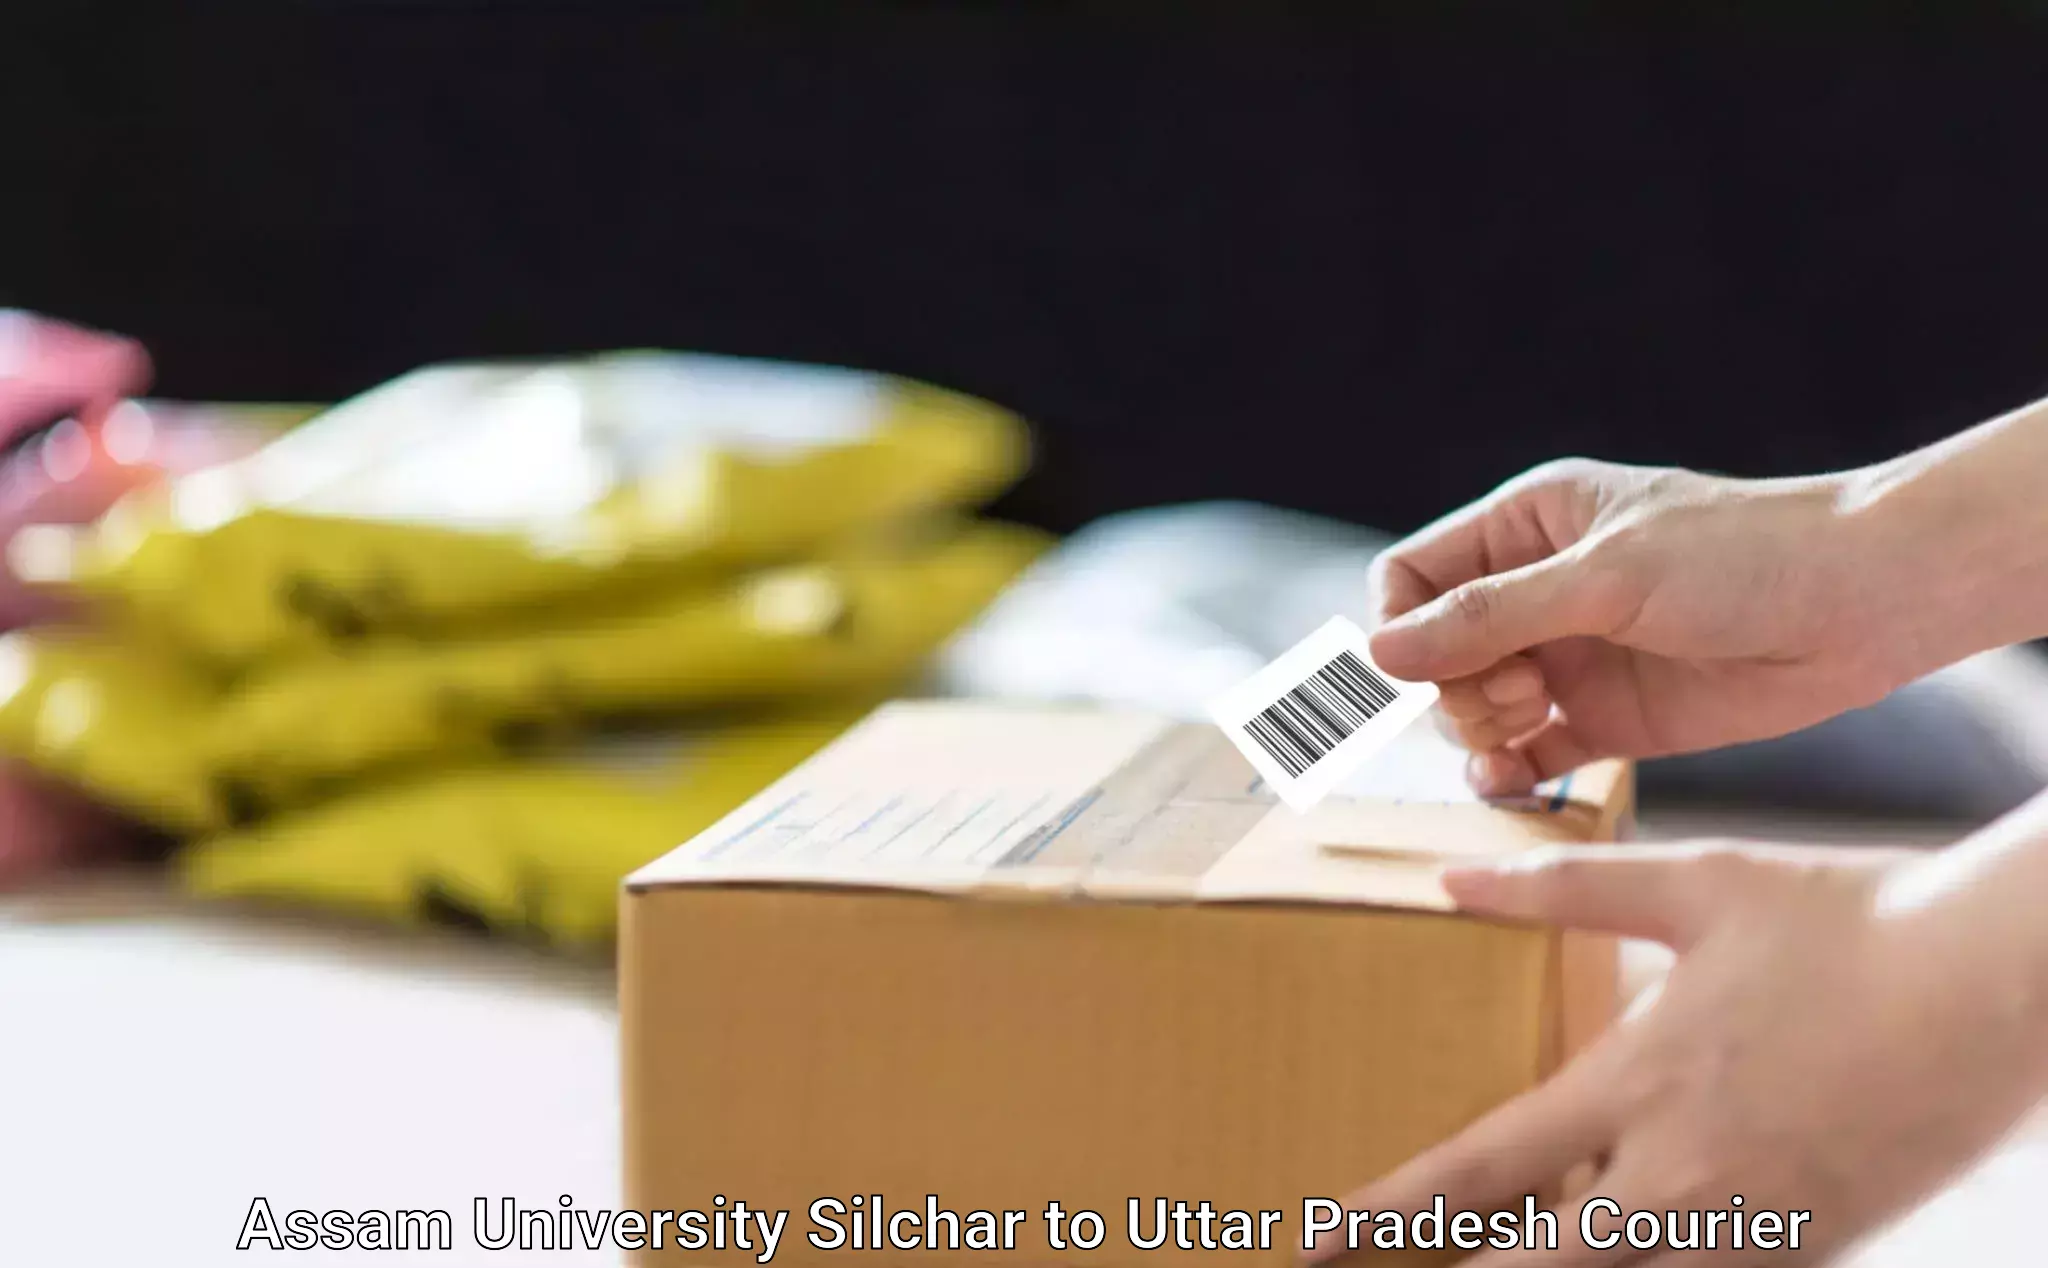 High-capacity parcel service Assam University Silchar to Chirgaon